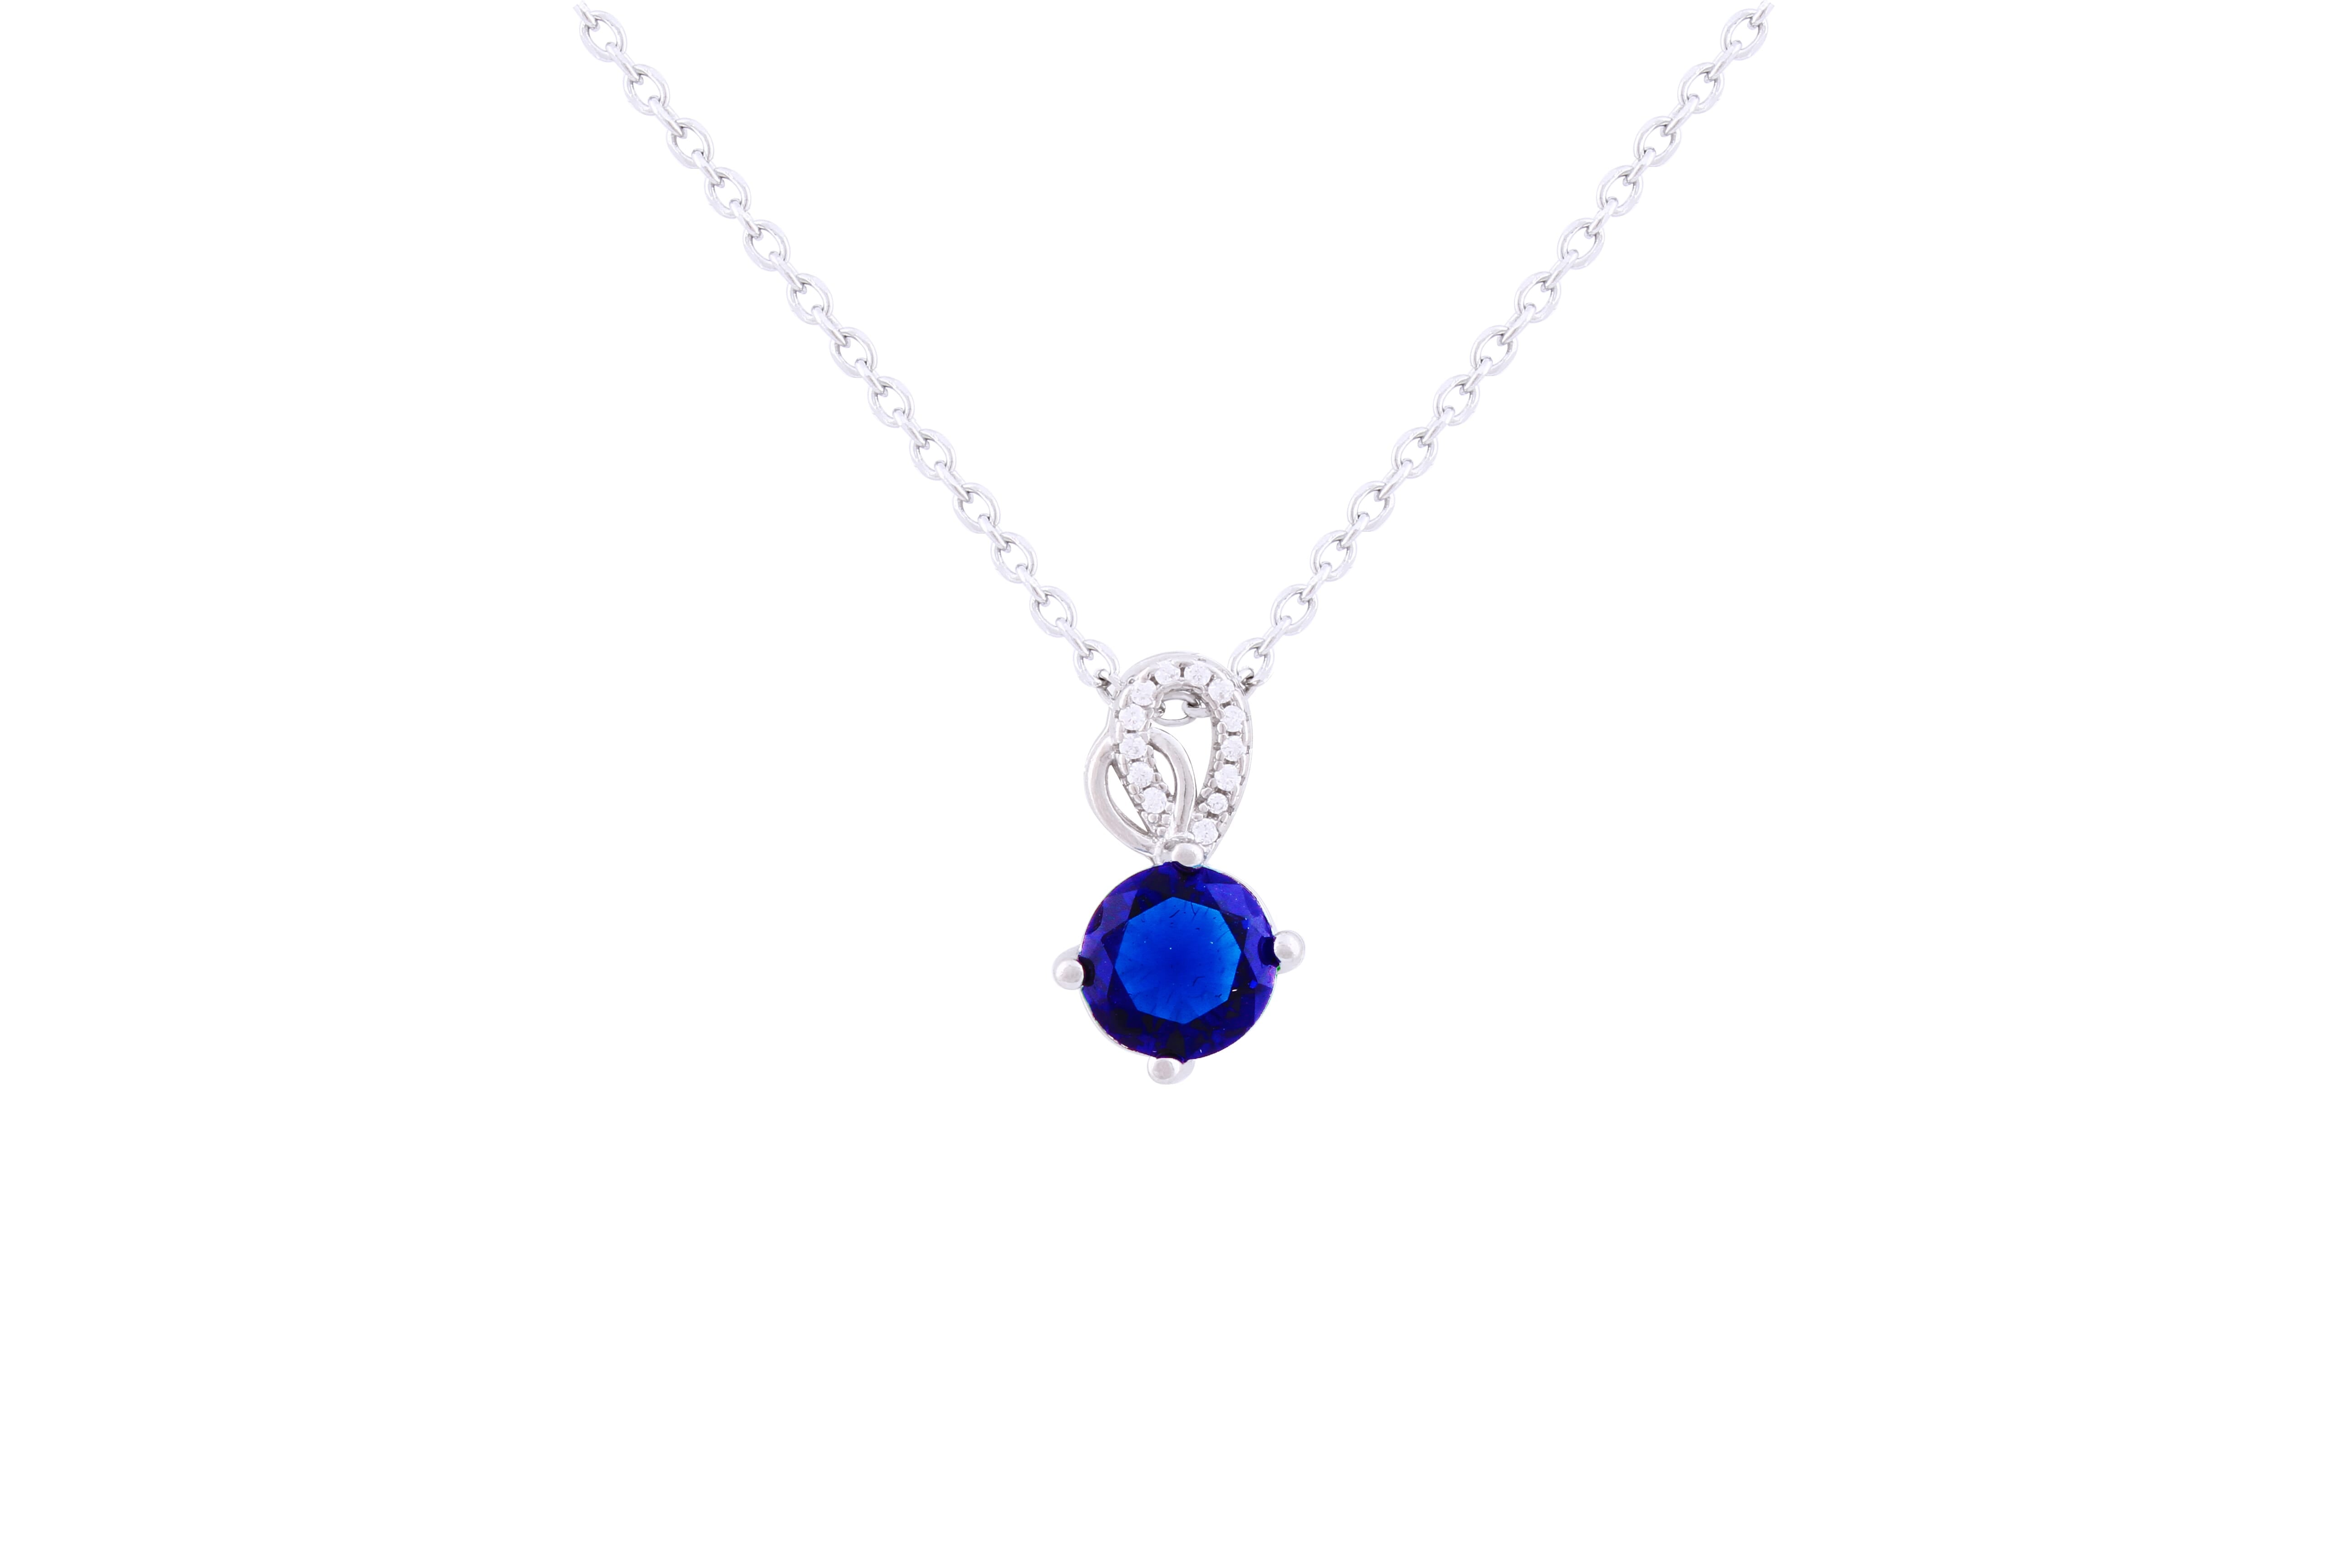 Asfour 925 Sterling Silver Necklace Inlaid With Round Blue Zircon Stone NR0500-B